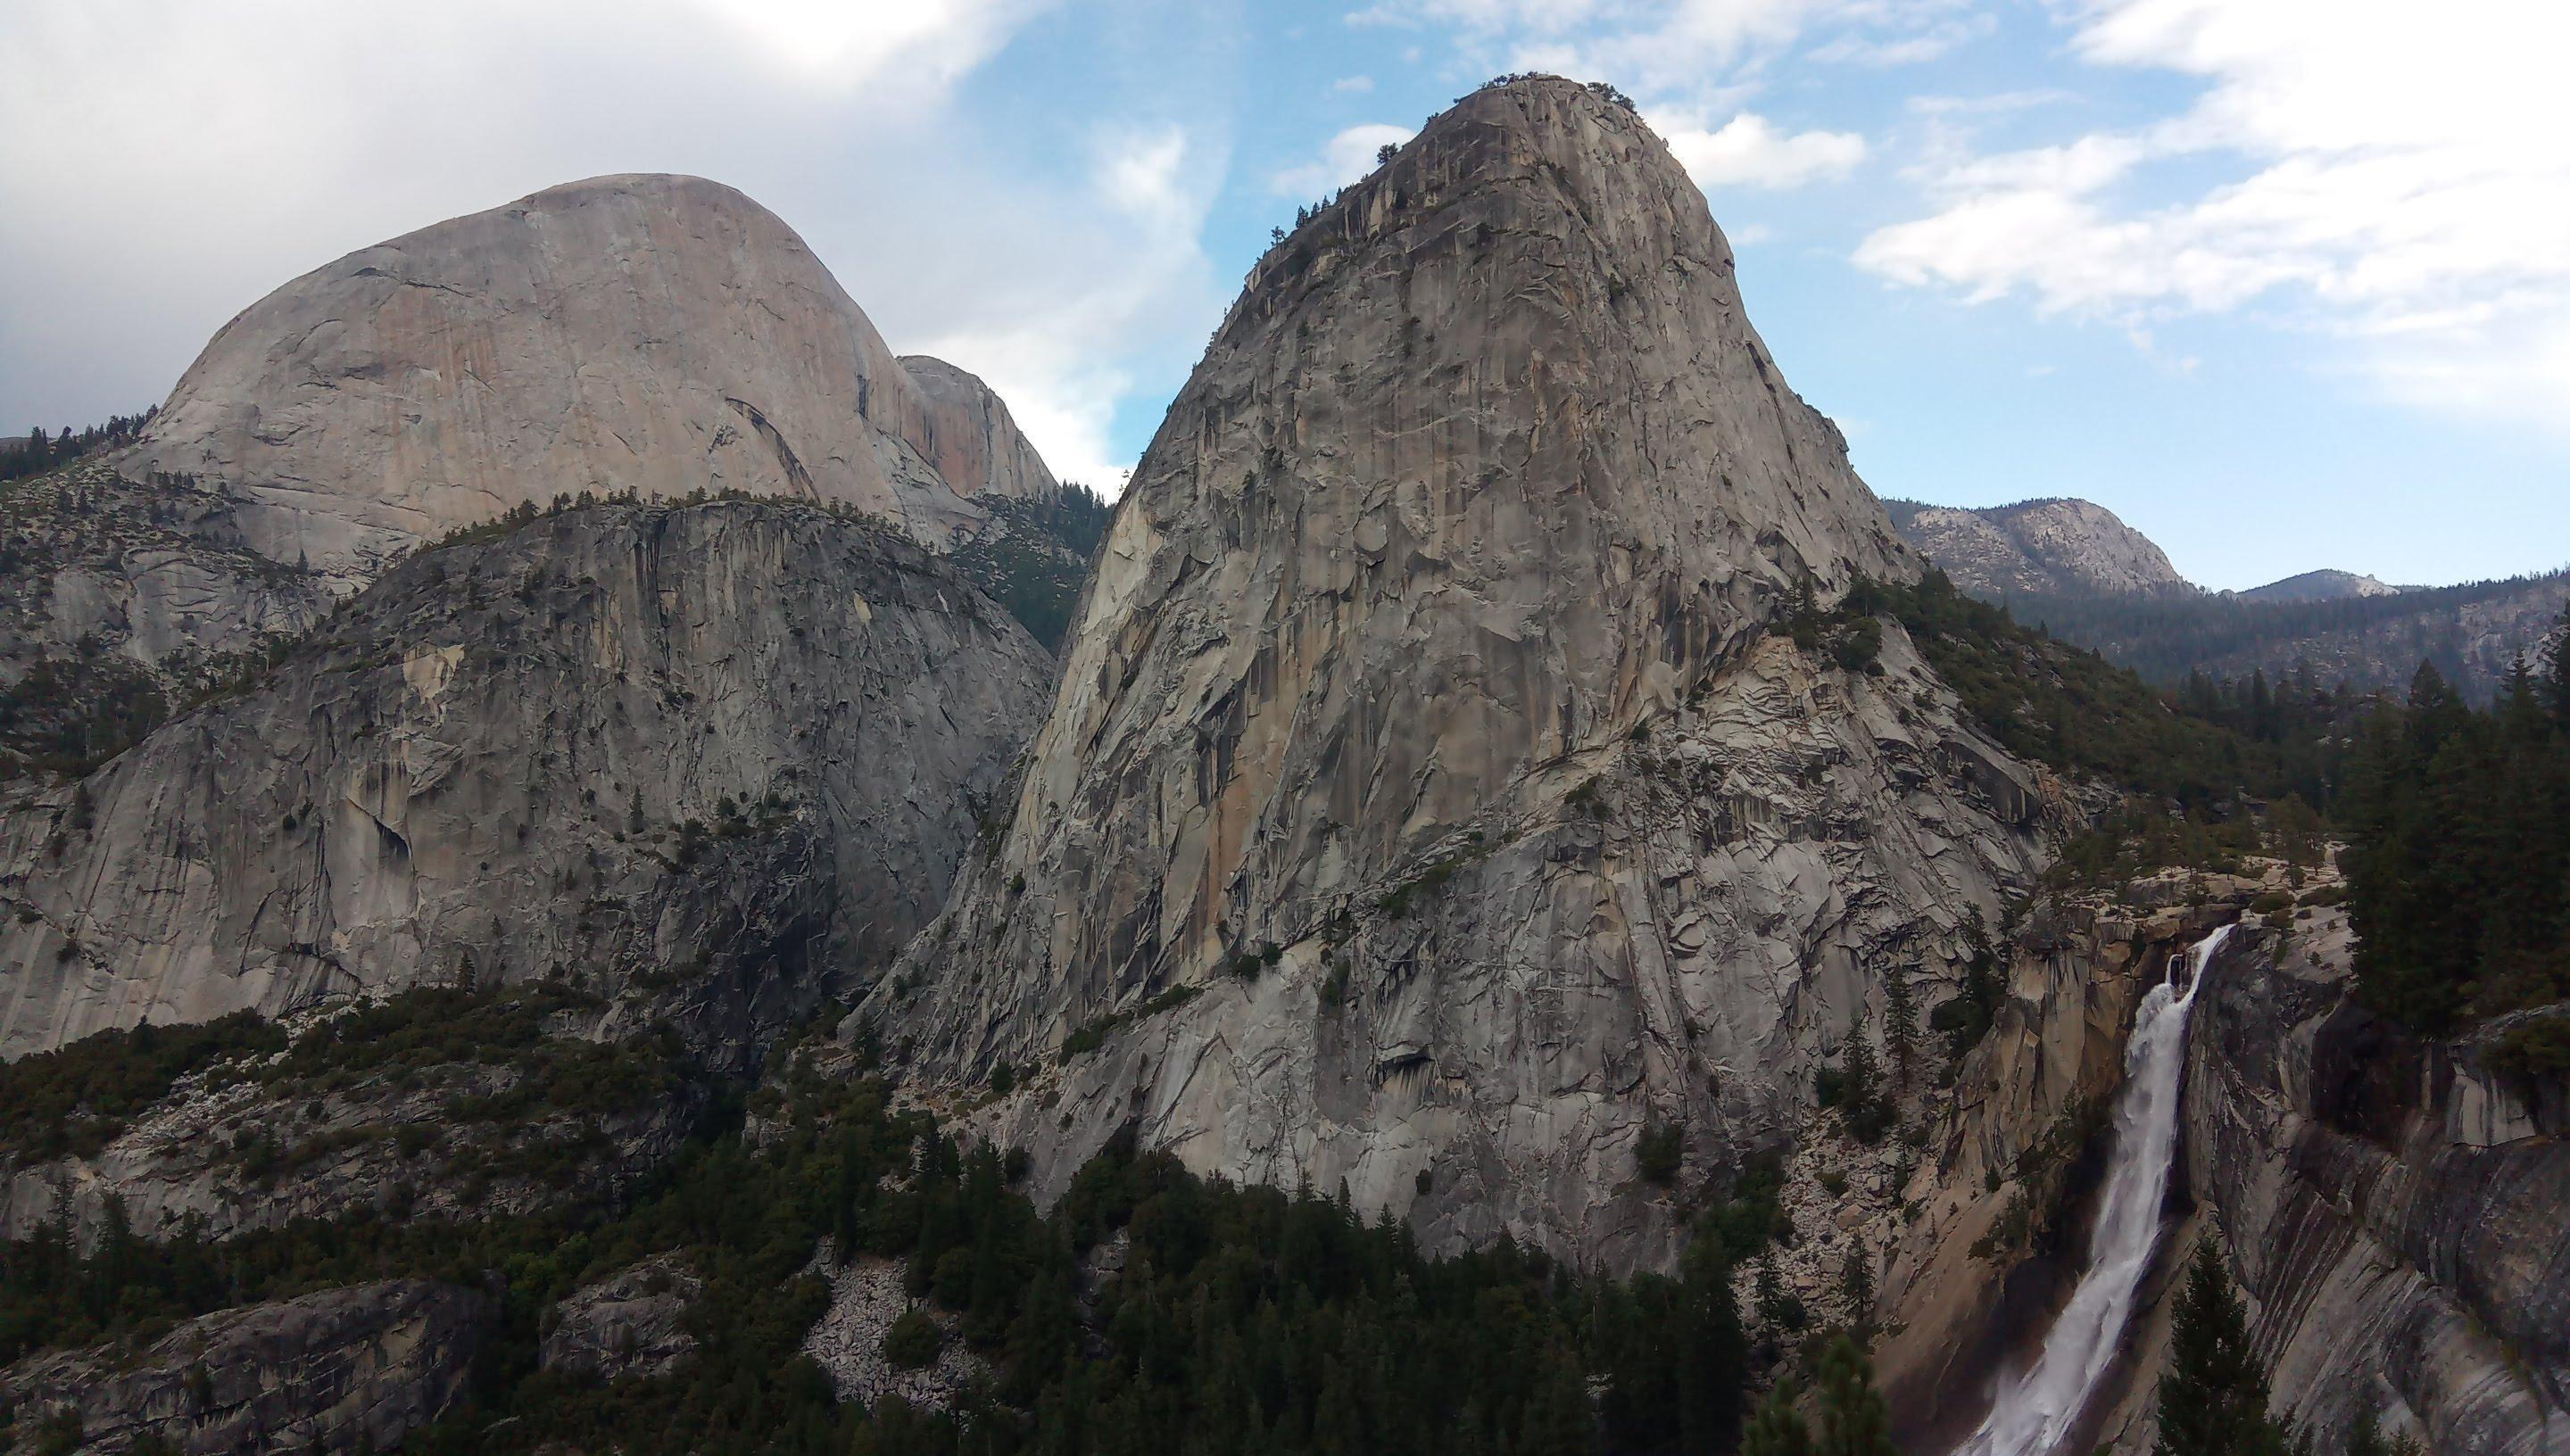 Half Dome, Mt. Broderick, Liberty Cap and Nevada fall